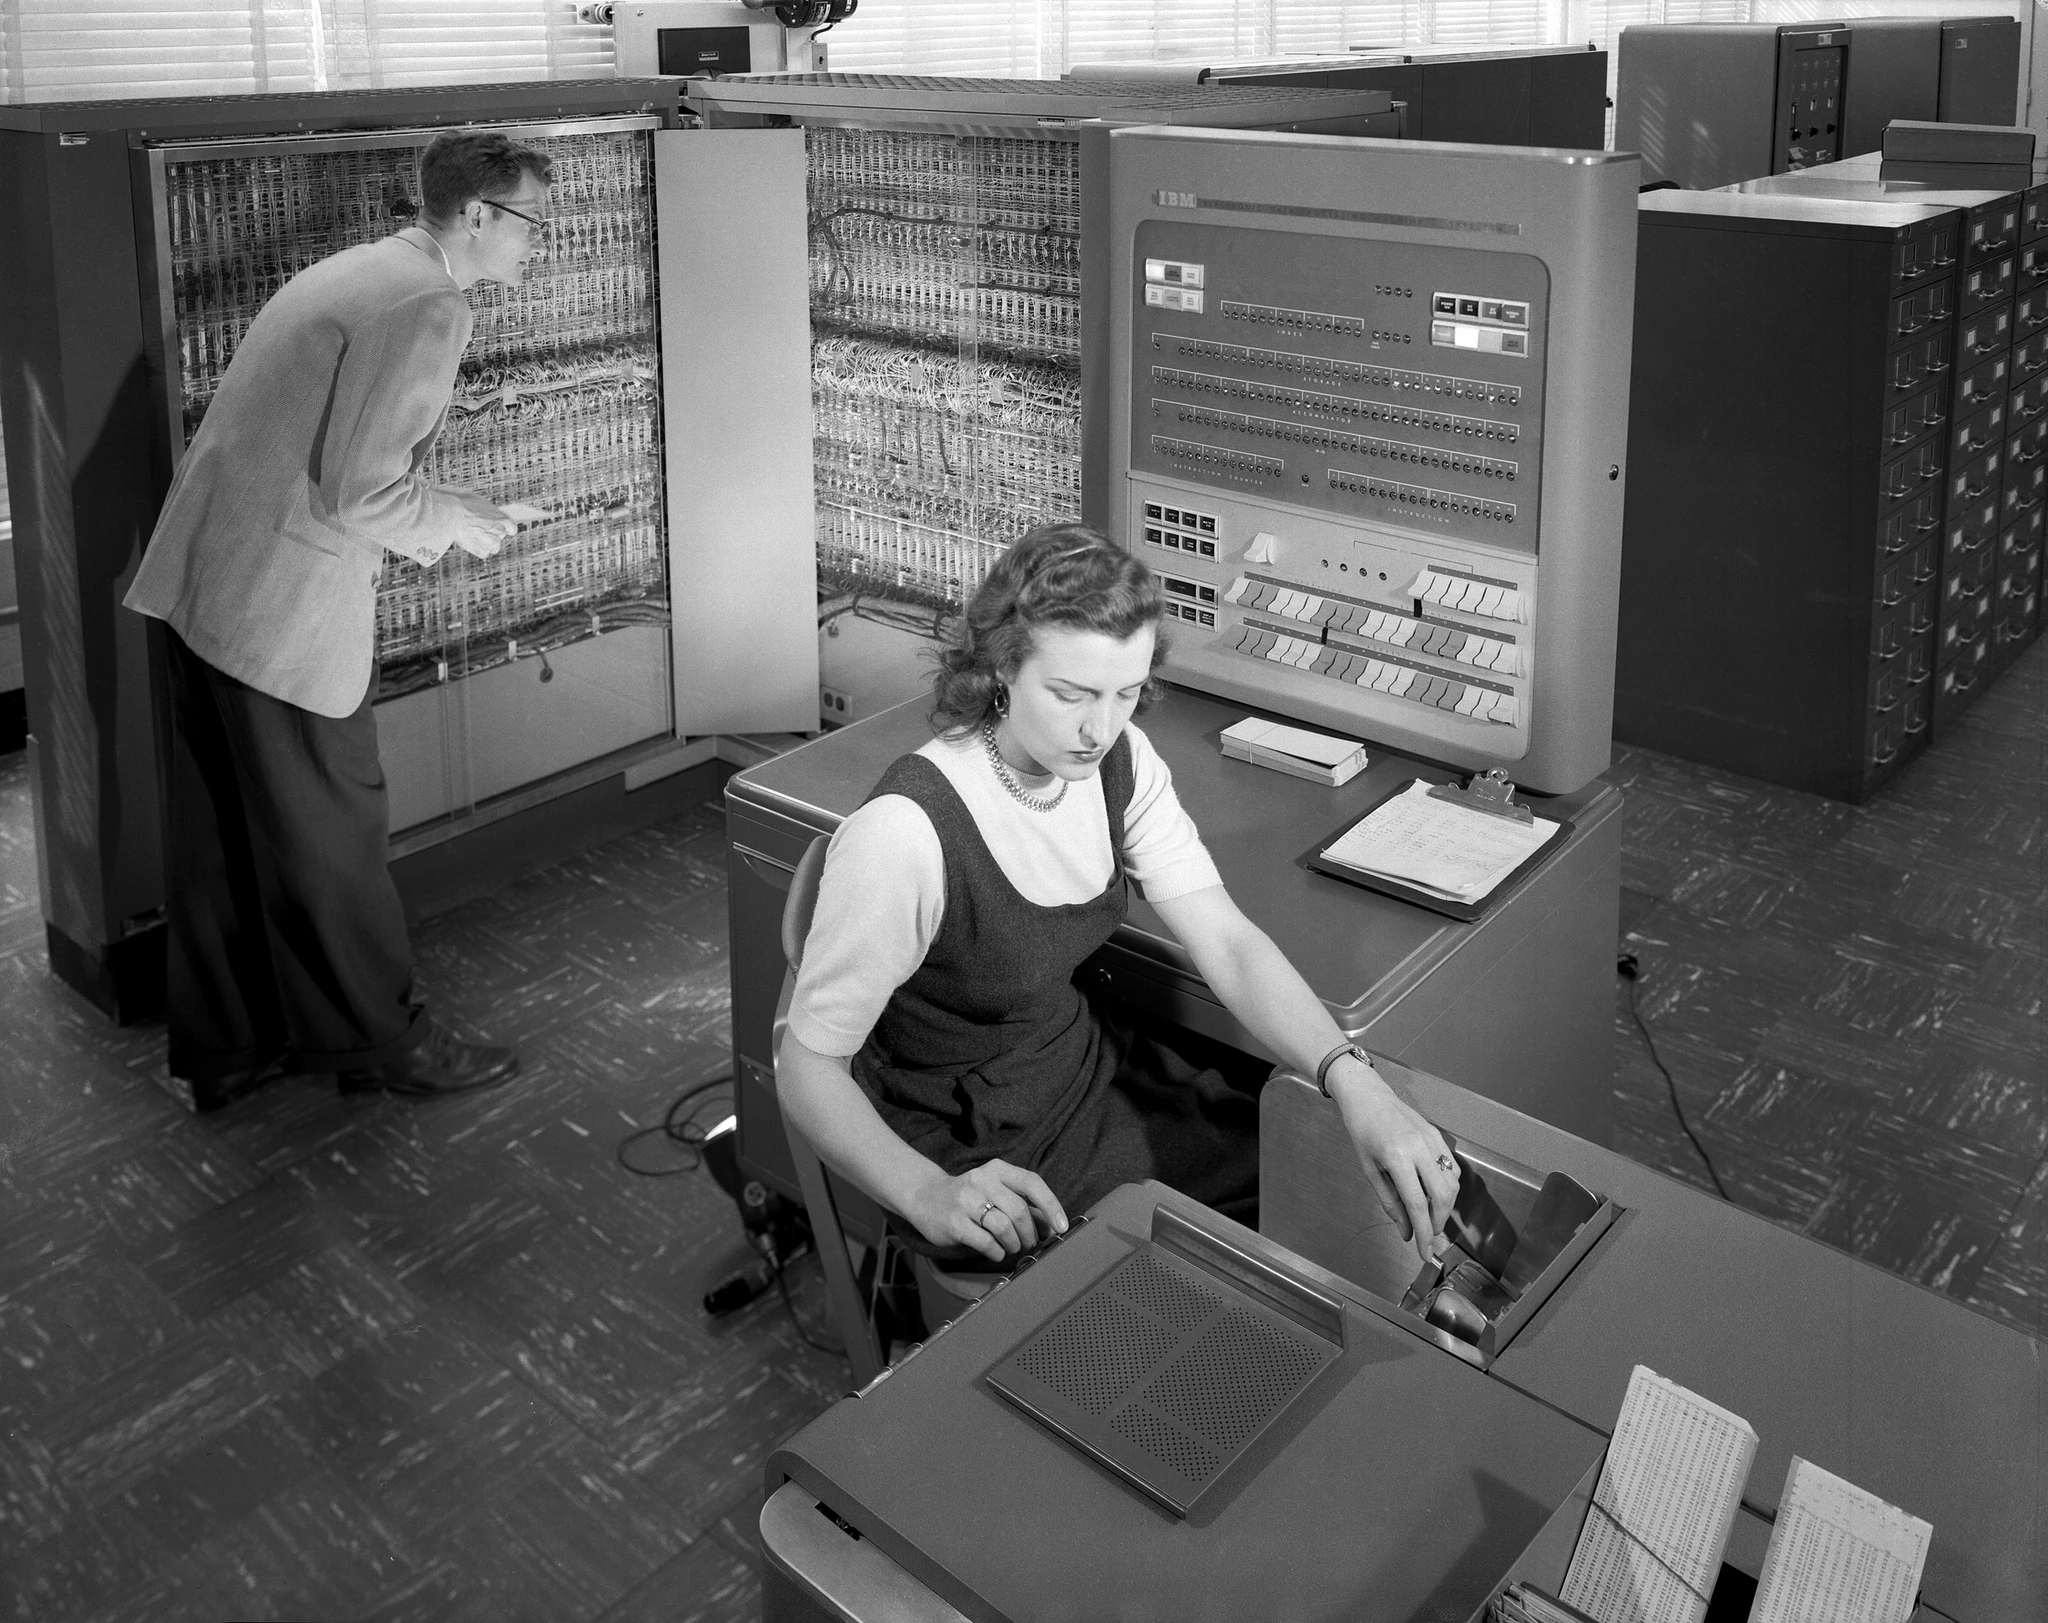 An IBM data processing machine in the 1950s.